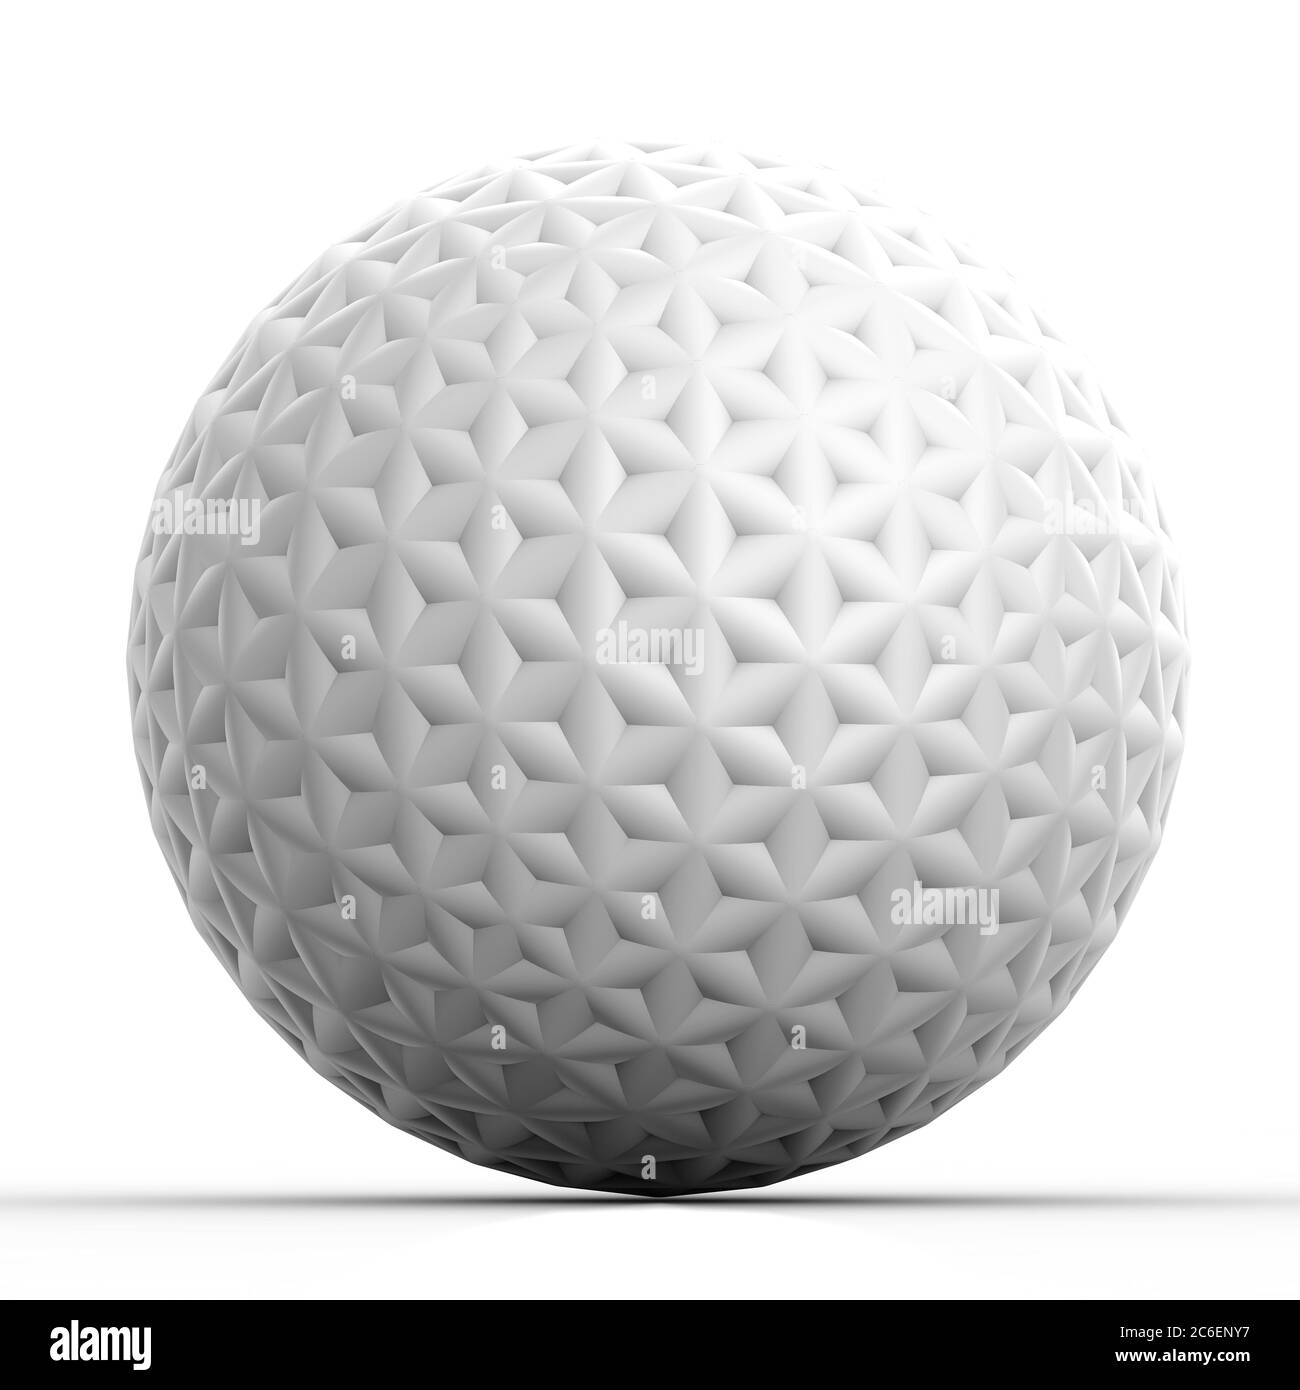 Geometric 3D object on white mathematical construction Stock Photo